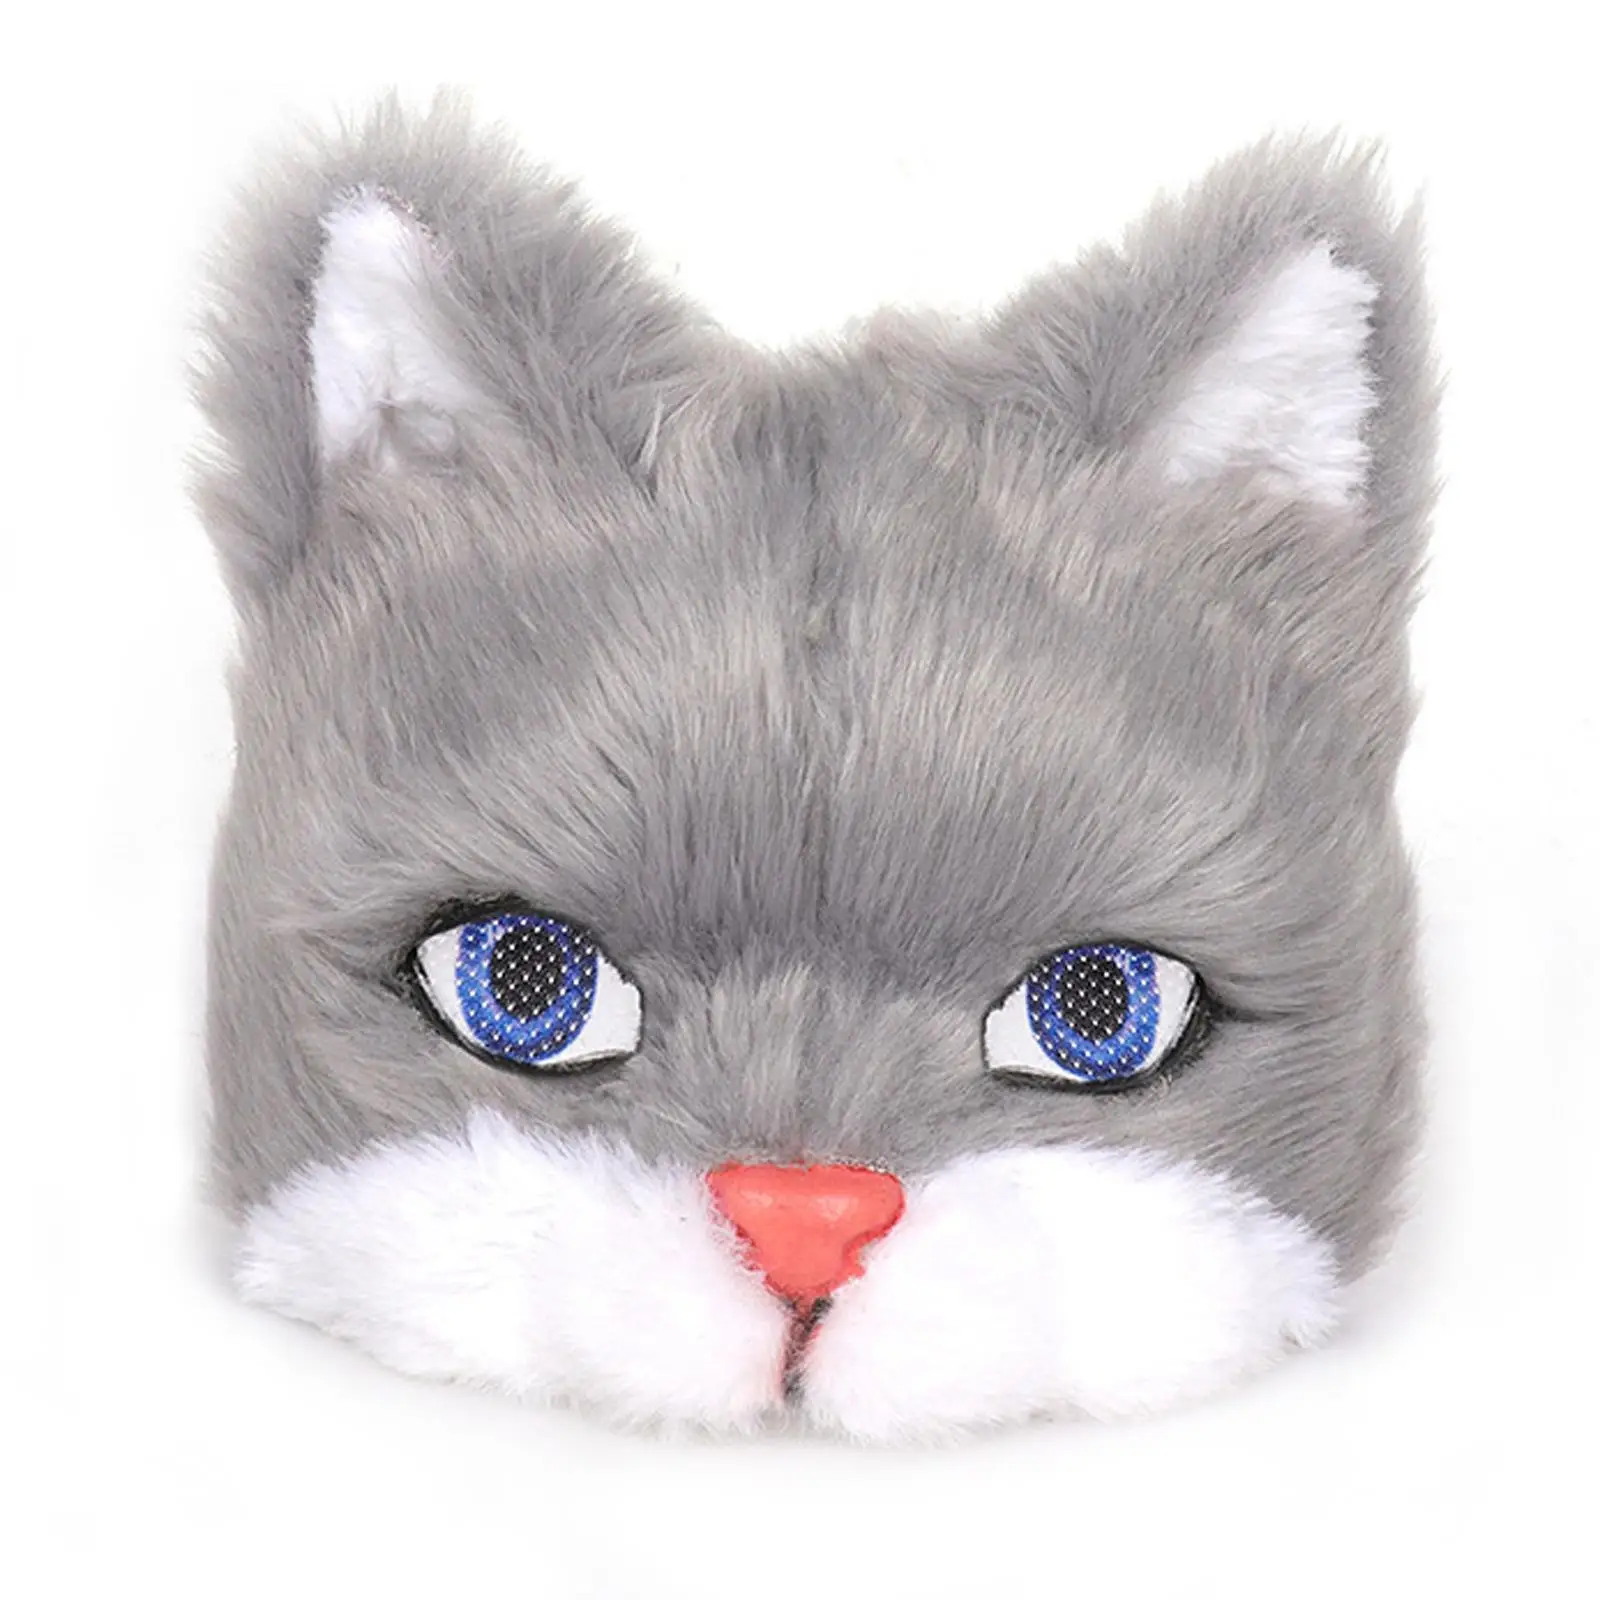 Cat Mask Half Face Animal Mask Simulation Mask for Kids Adults for Role Play Party Masquerade Halloween Photo Prop